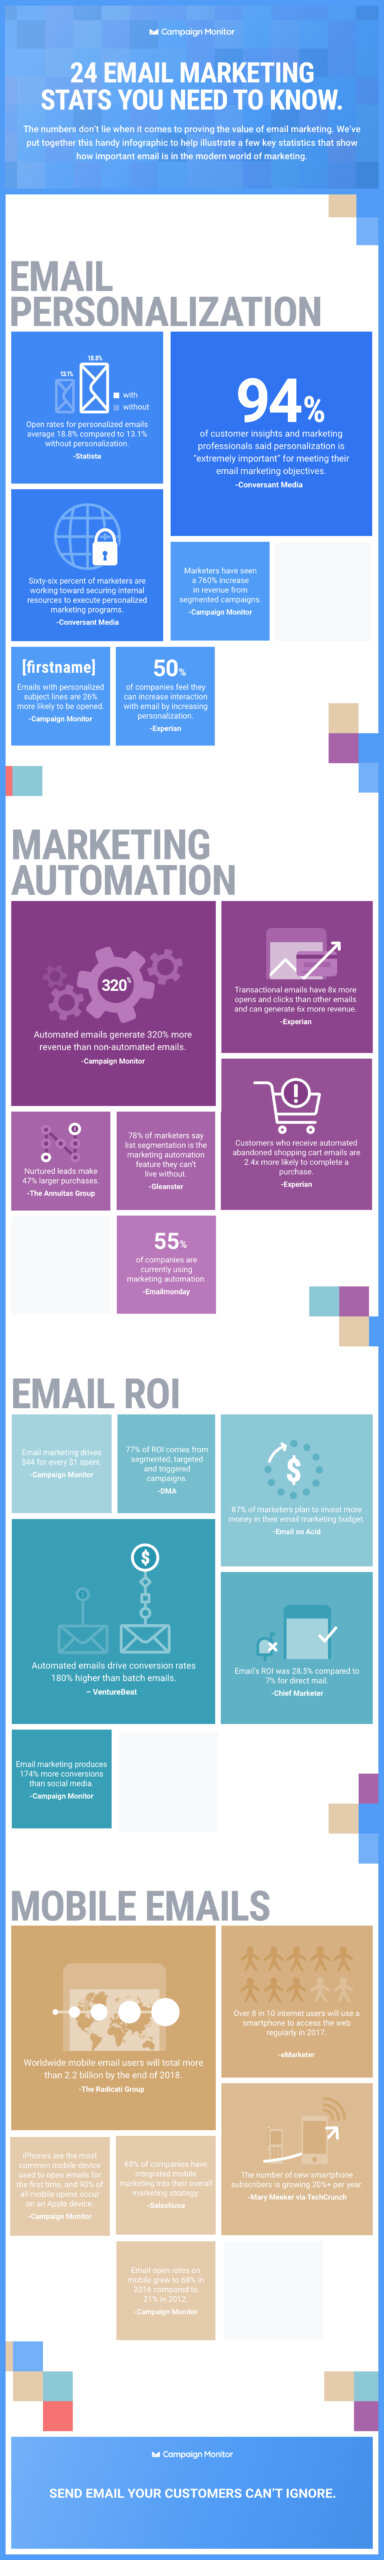 24 email marketing stats you need to know